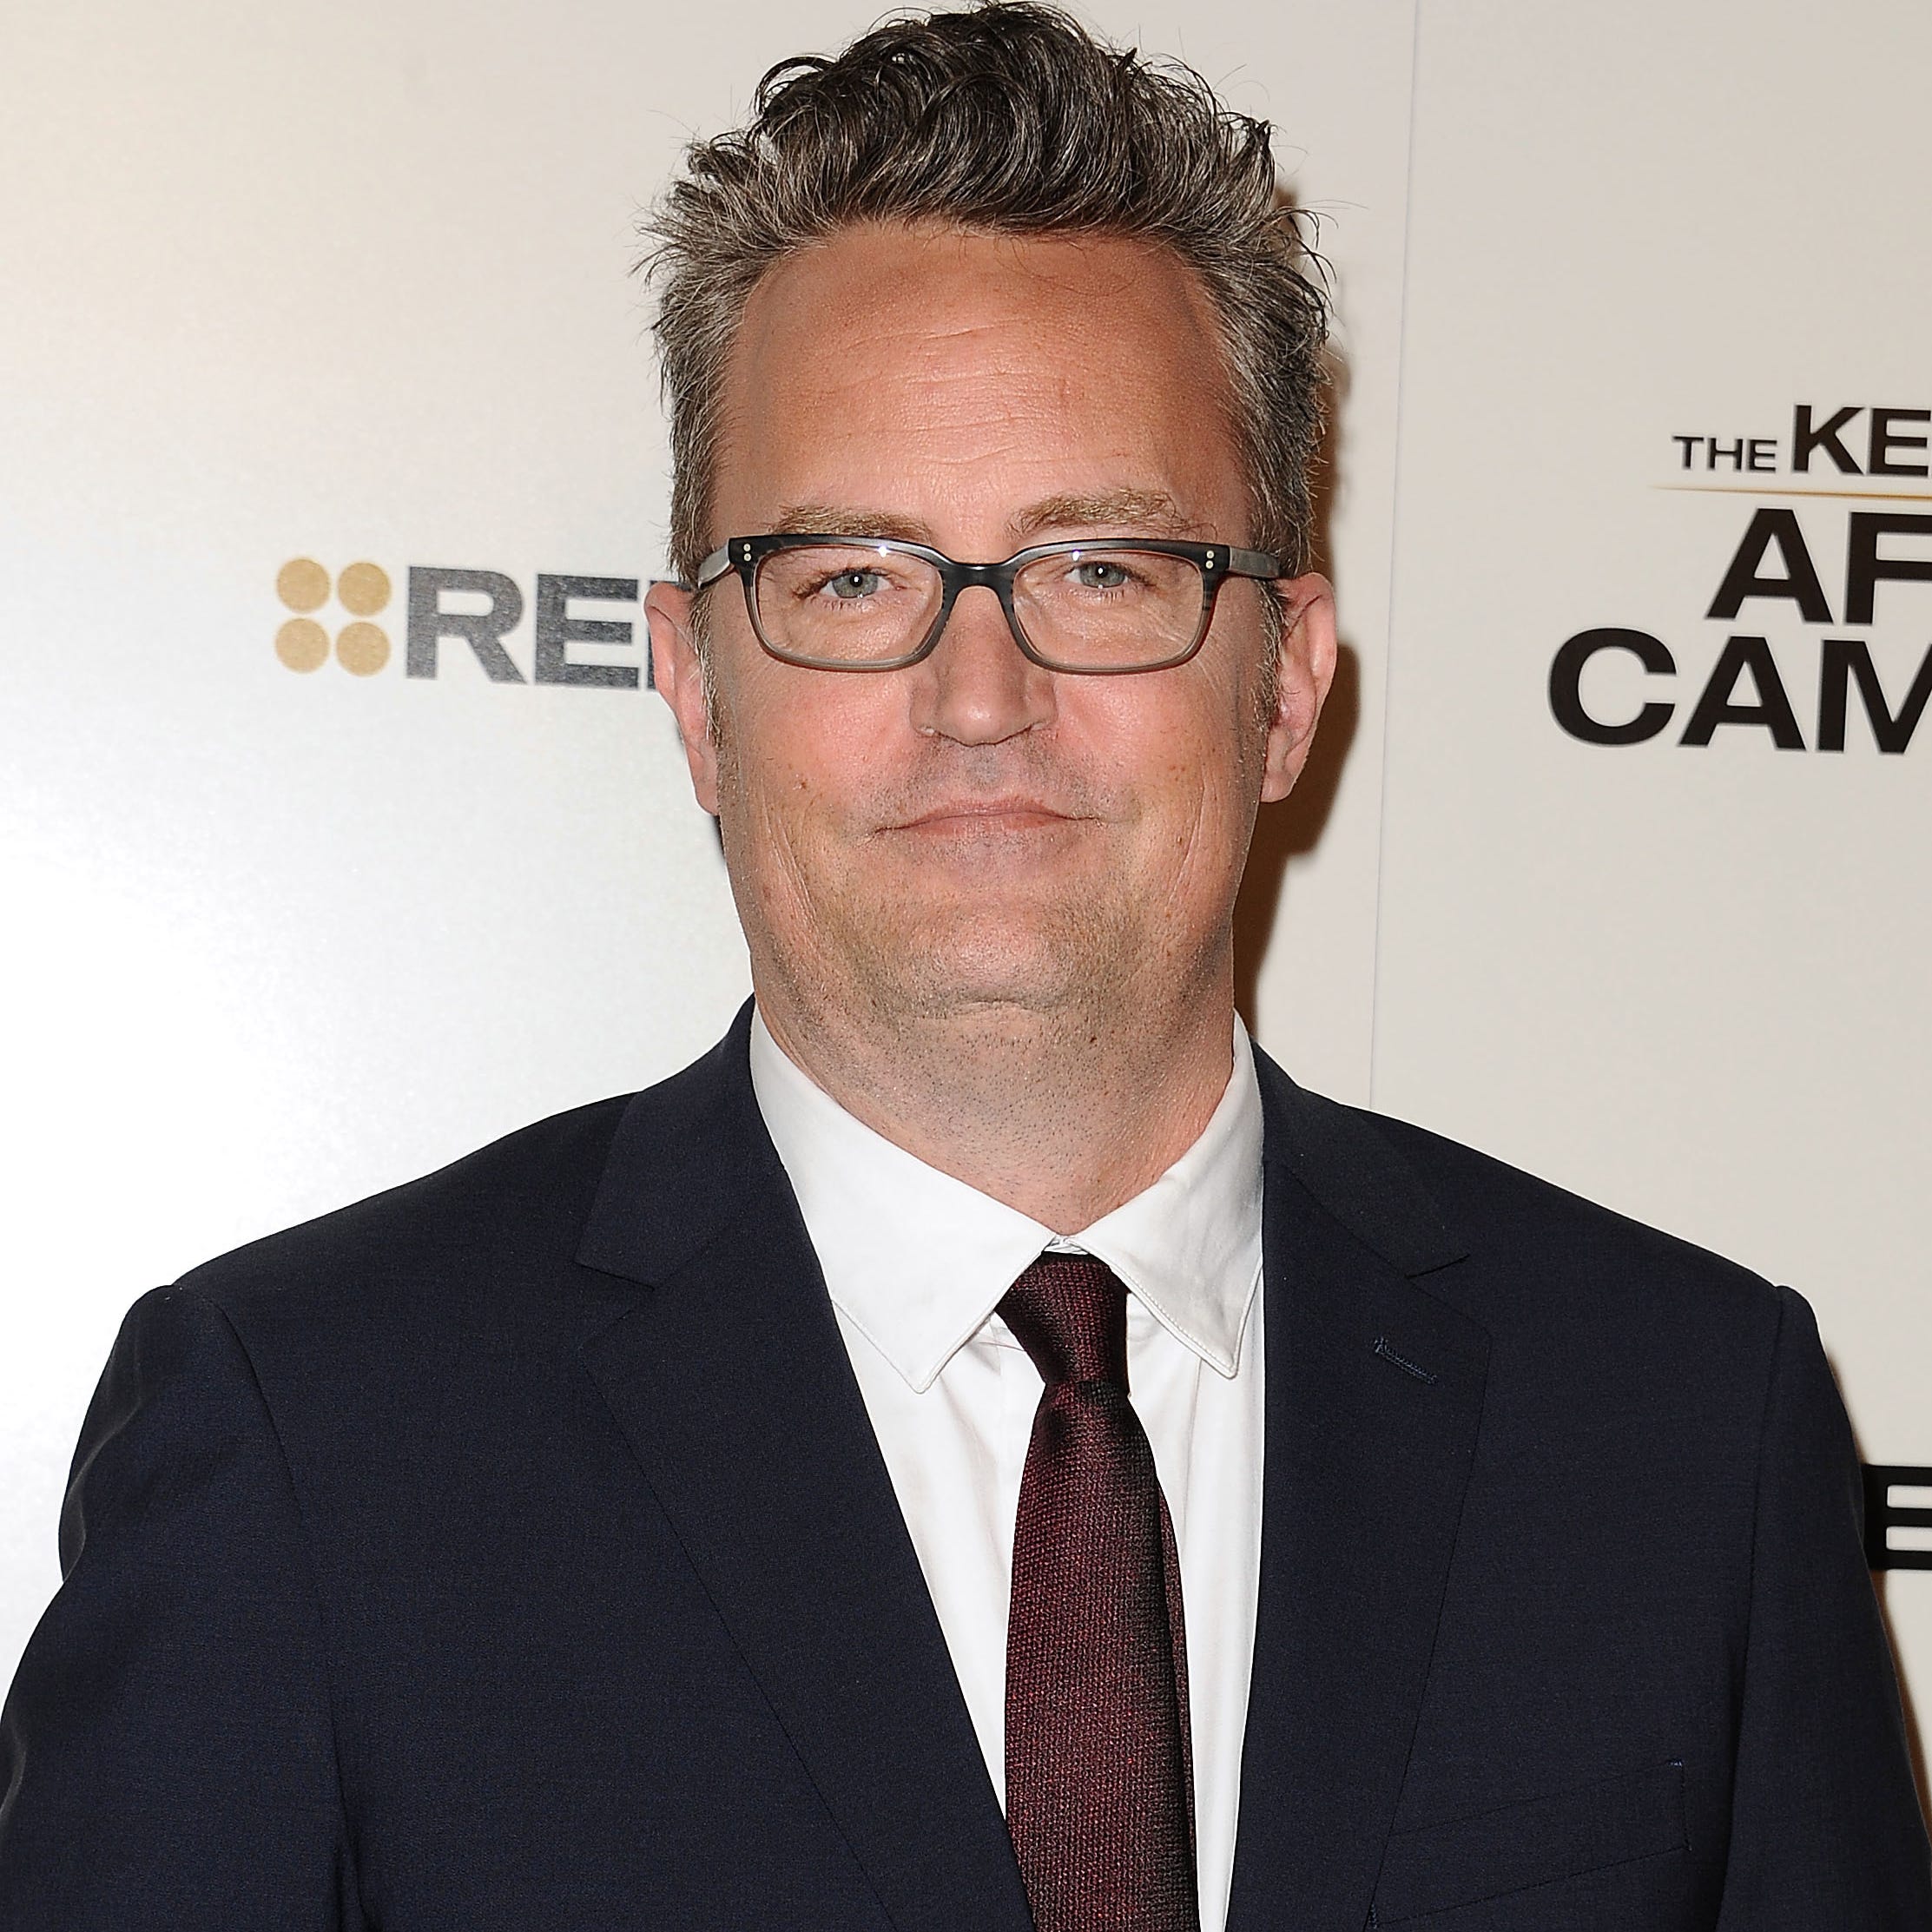 Actor Matthew Perry attends the premiere of "The Kennedys: After Camelot" at The Paley Center for Media on March 15, 2017 in Beverly Hills, California.